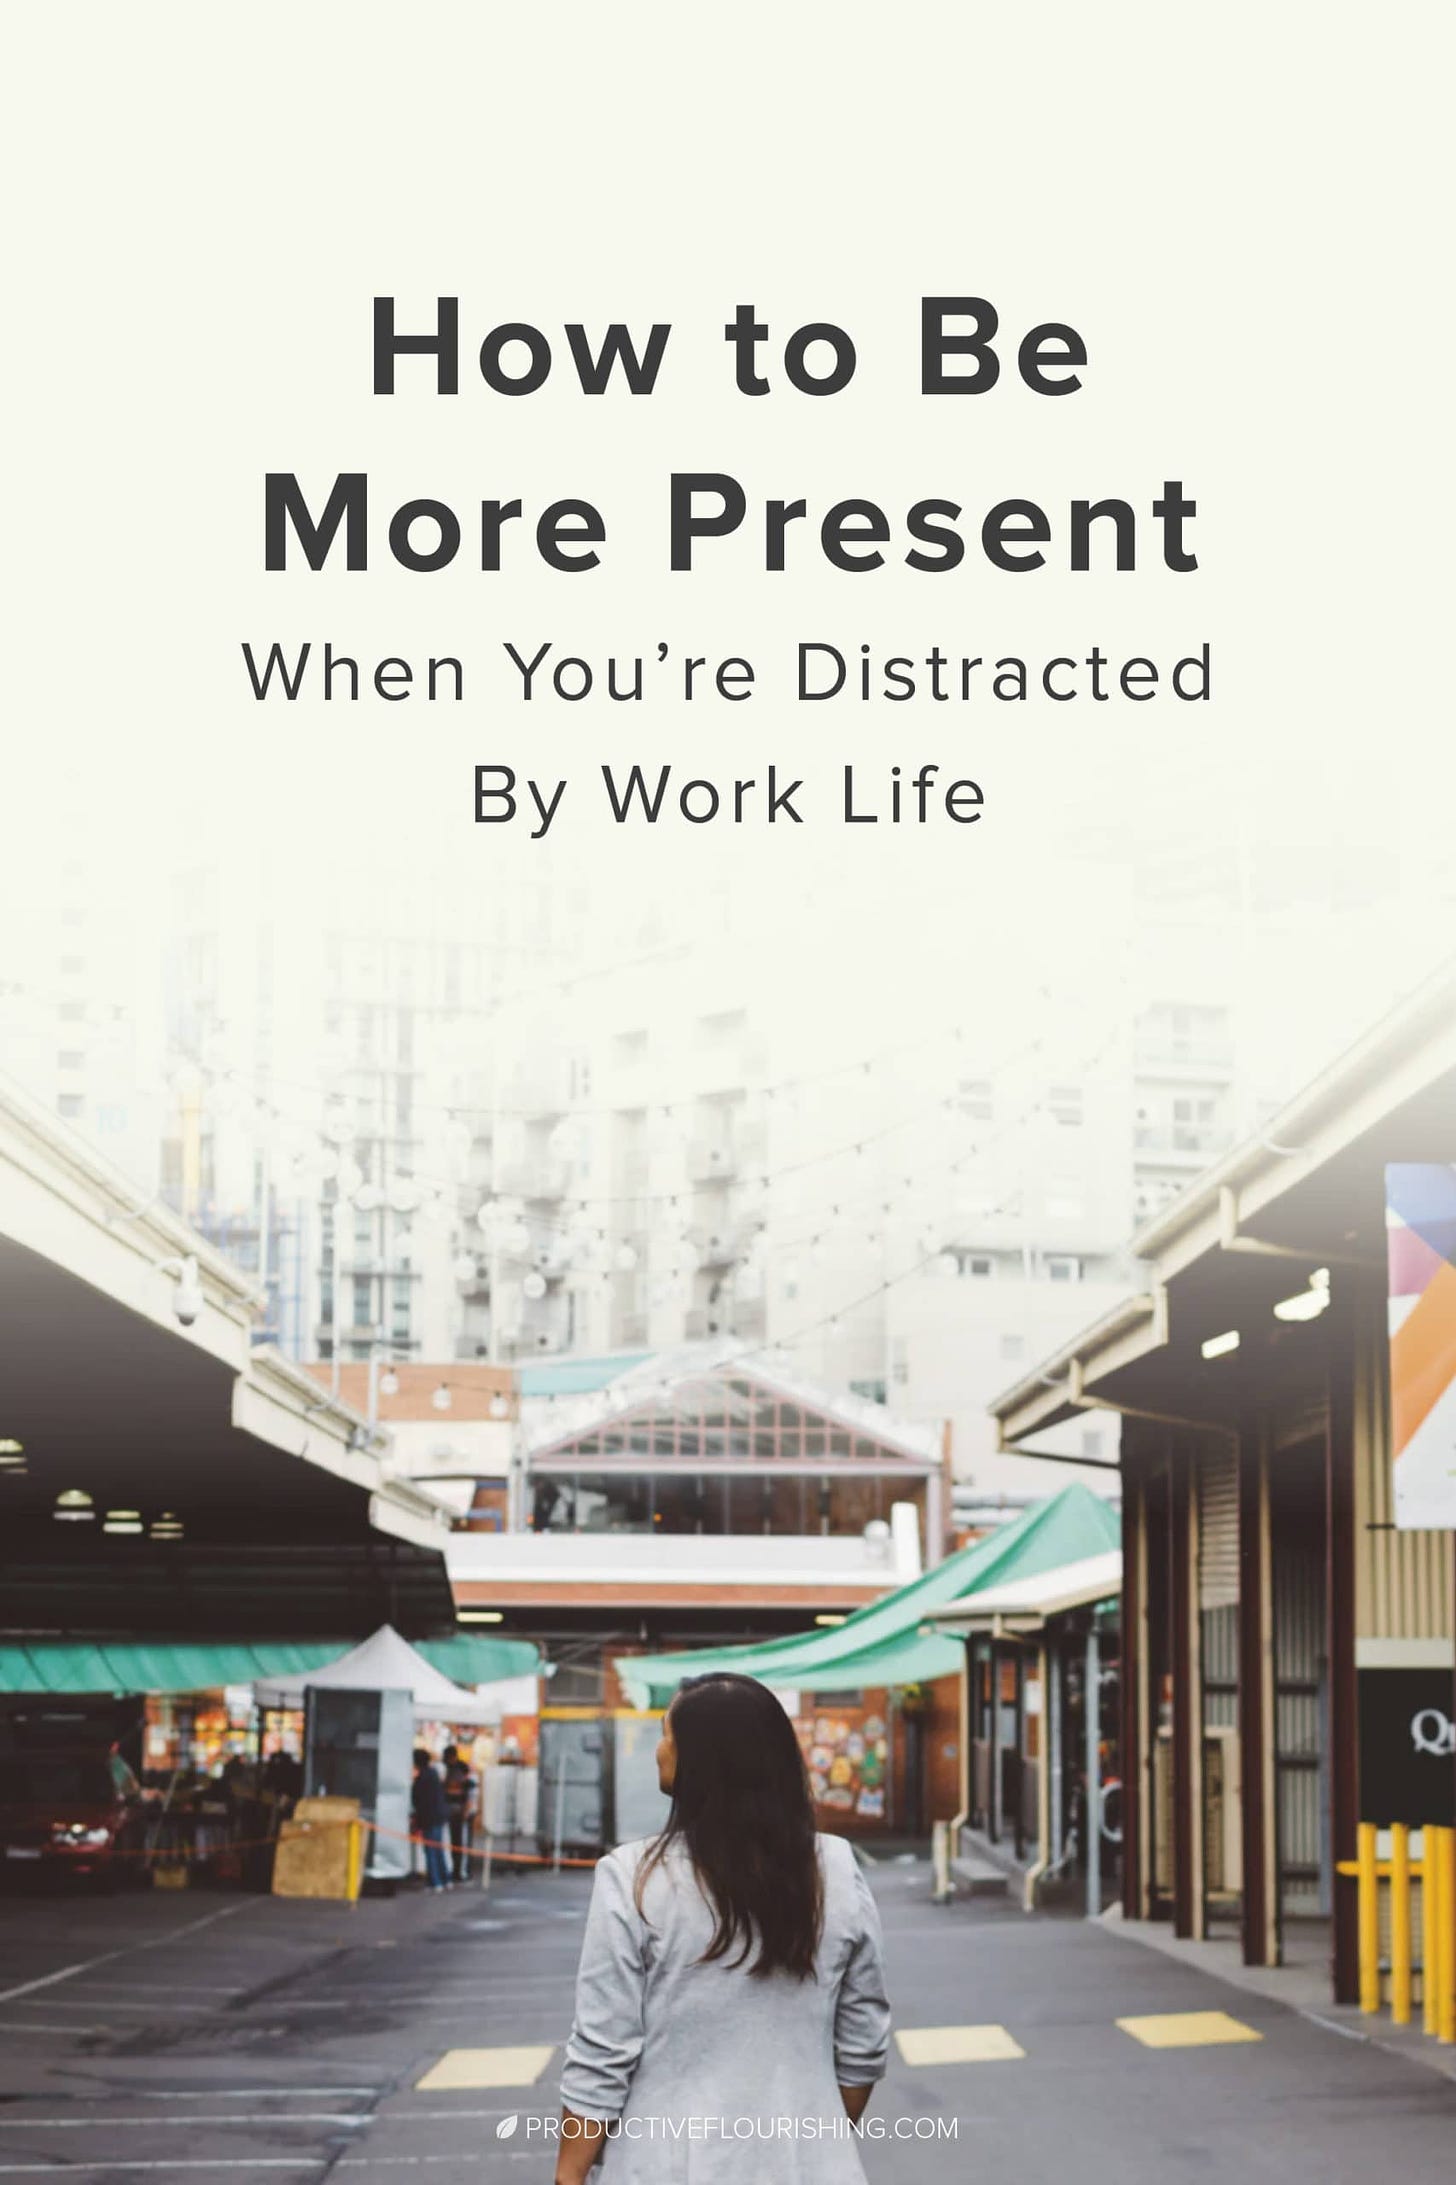 Resilience: Overcoming Major Disruptions In Your Work Life. Learn how resilience is key to bounce back professionally when personal experiences disrupt productivity at work. Three in-depth tips to practice resilience for your own recovery and bounce back to productivity. #resilientmindset #professionalsuccessskills #productiveflourishing